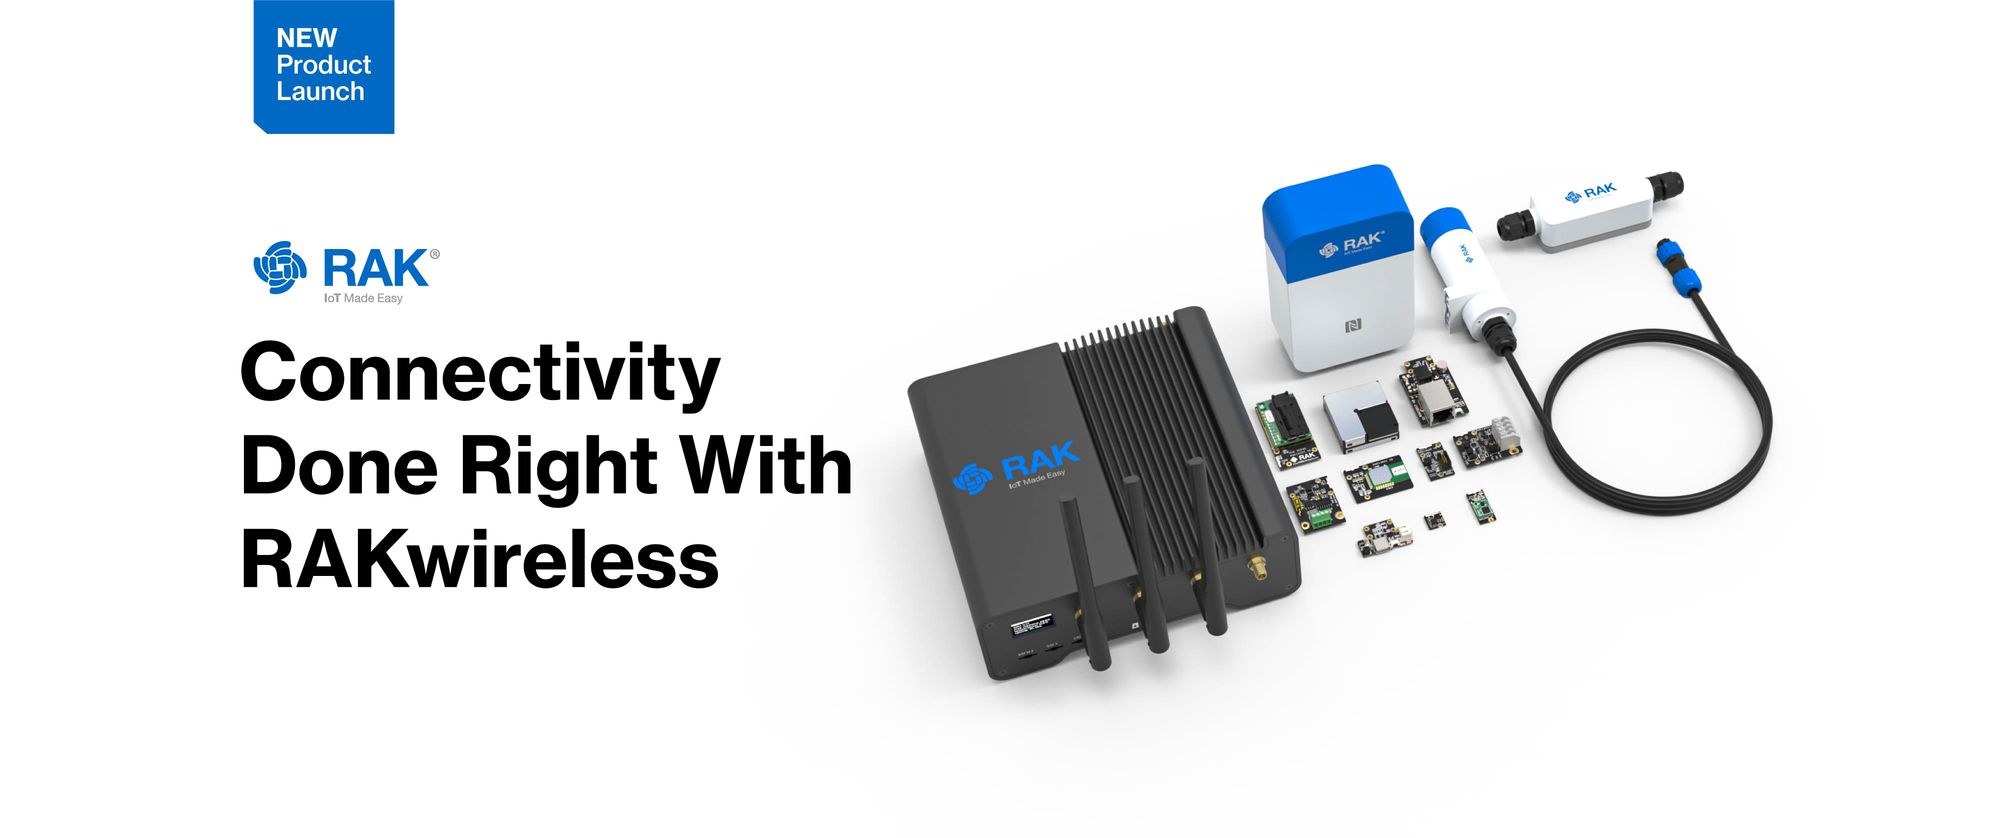 Connectivity, Done Right with RAKwireless